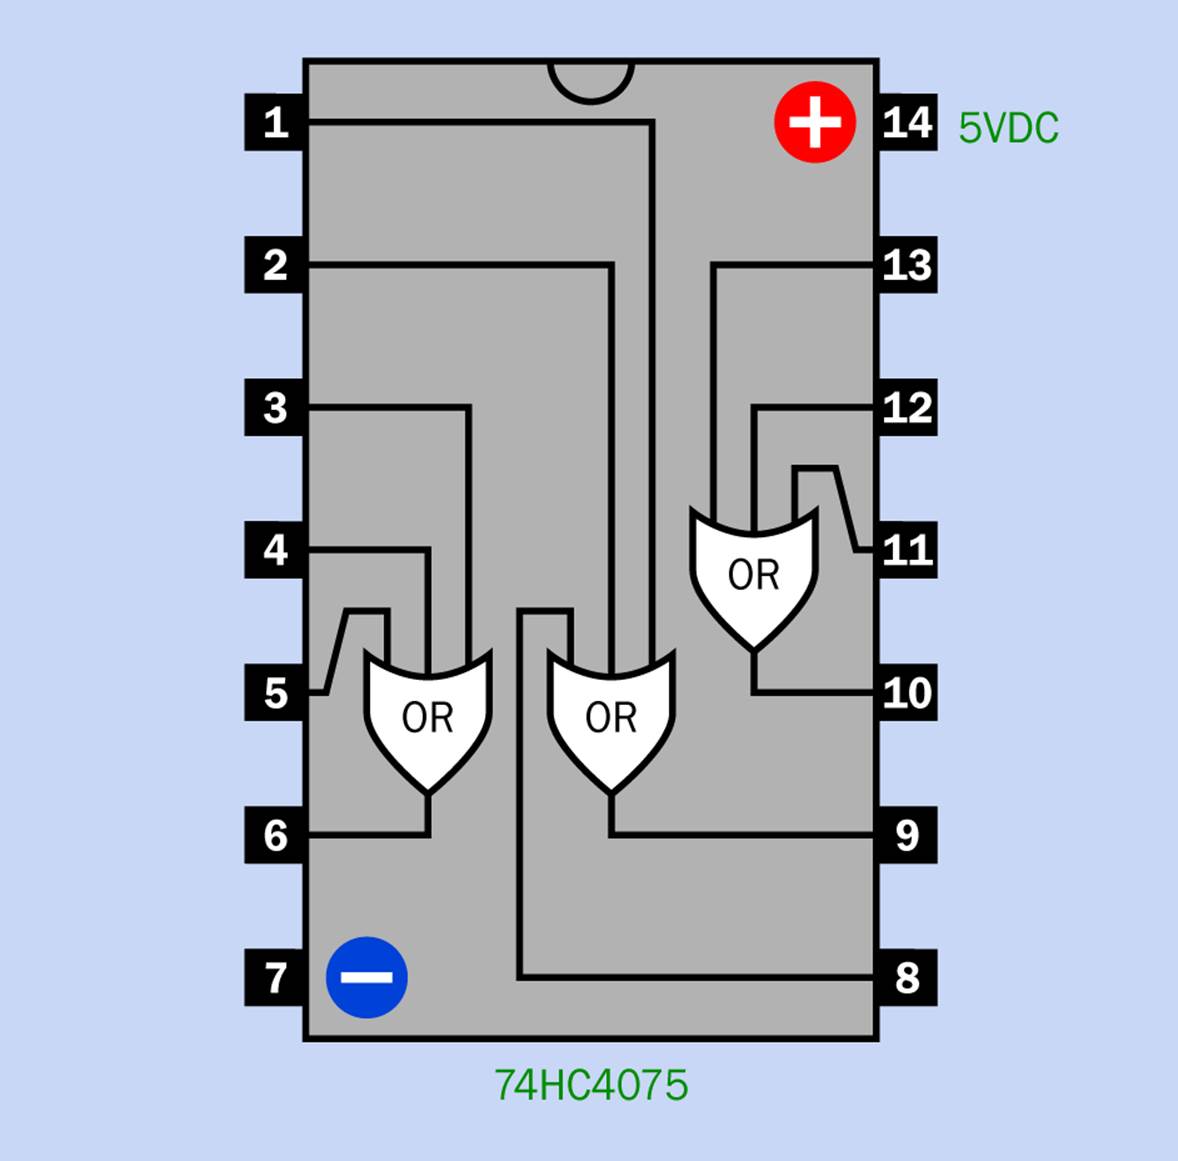 Internal connections of the three OR gates inside a 74HC4075 chip.